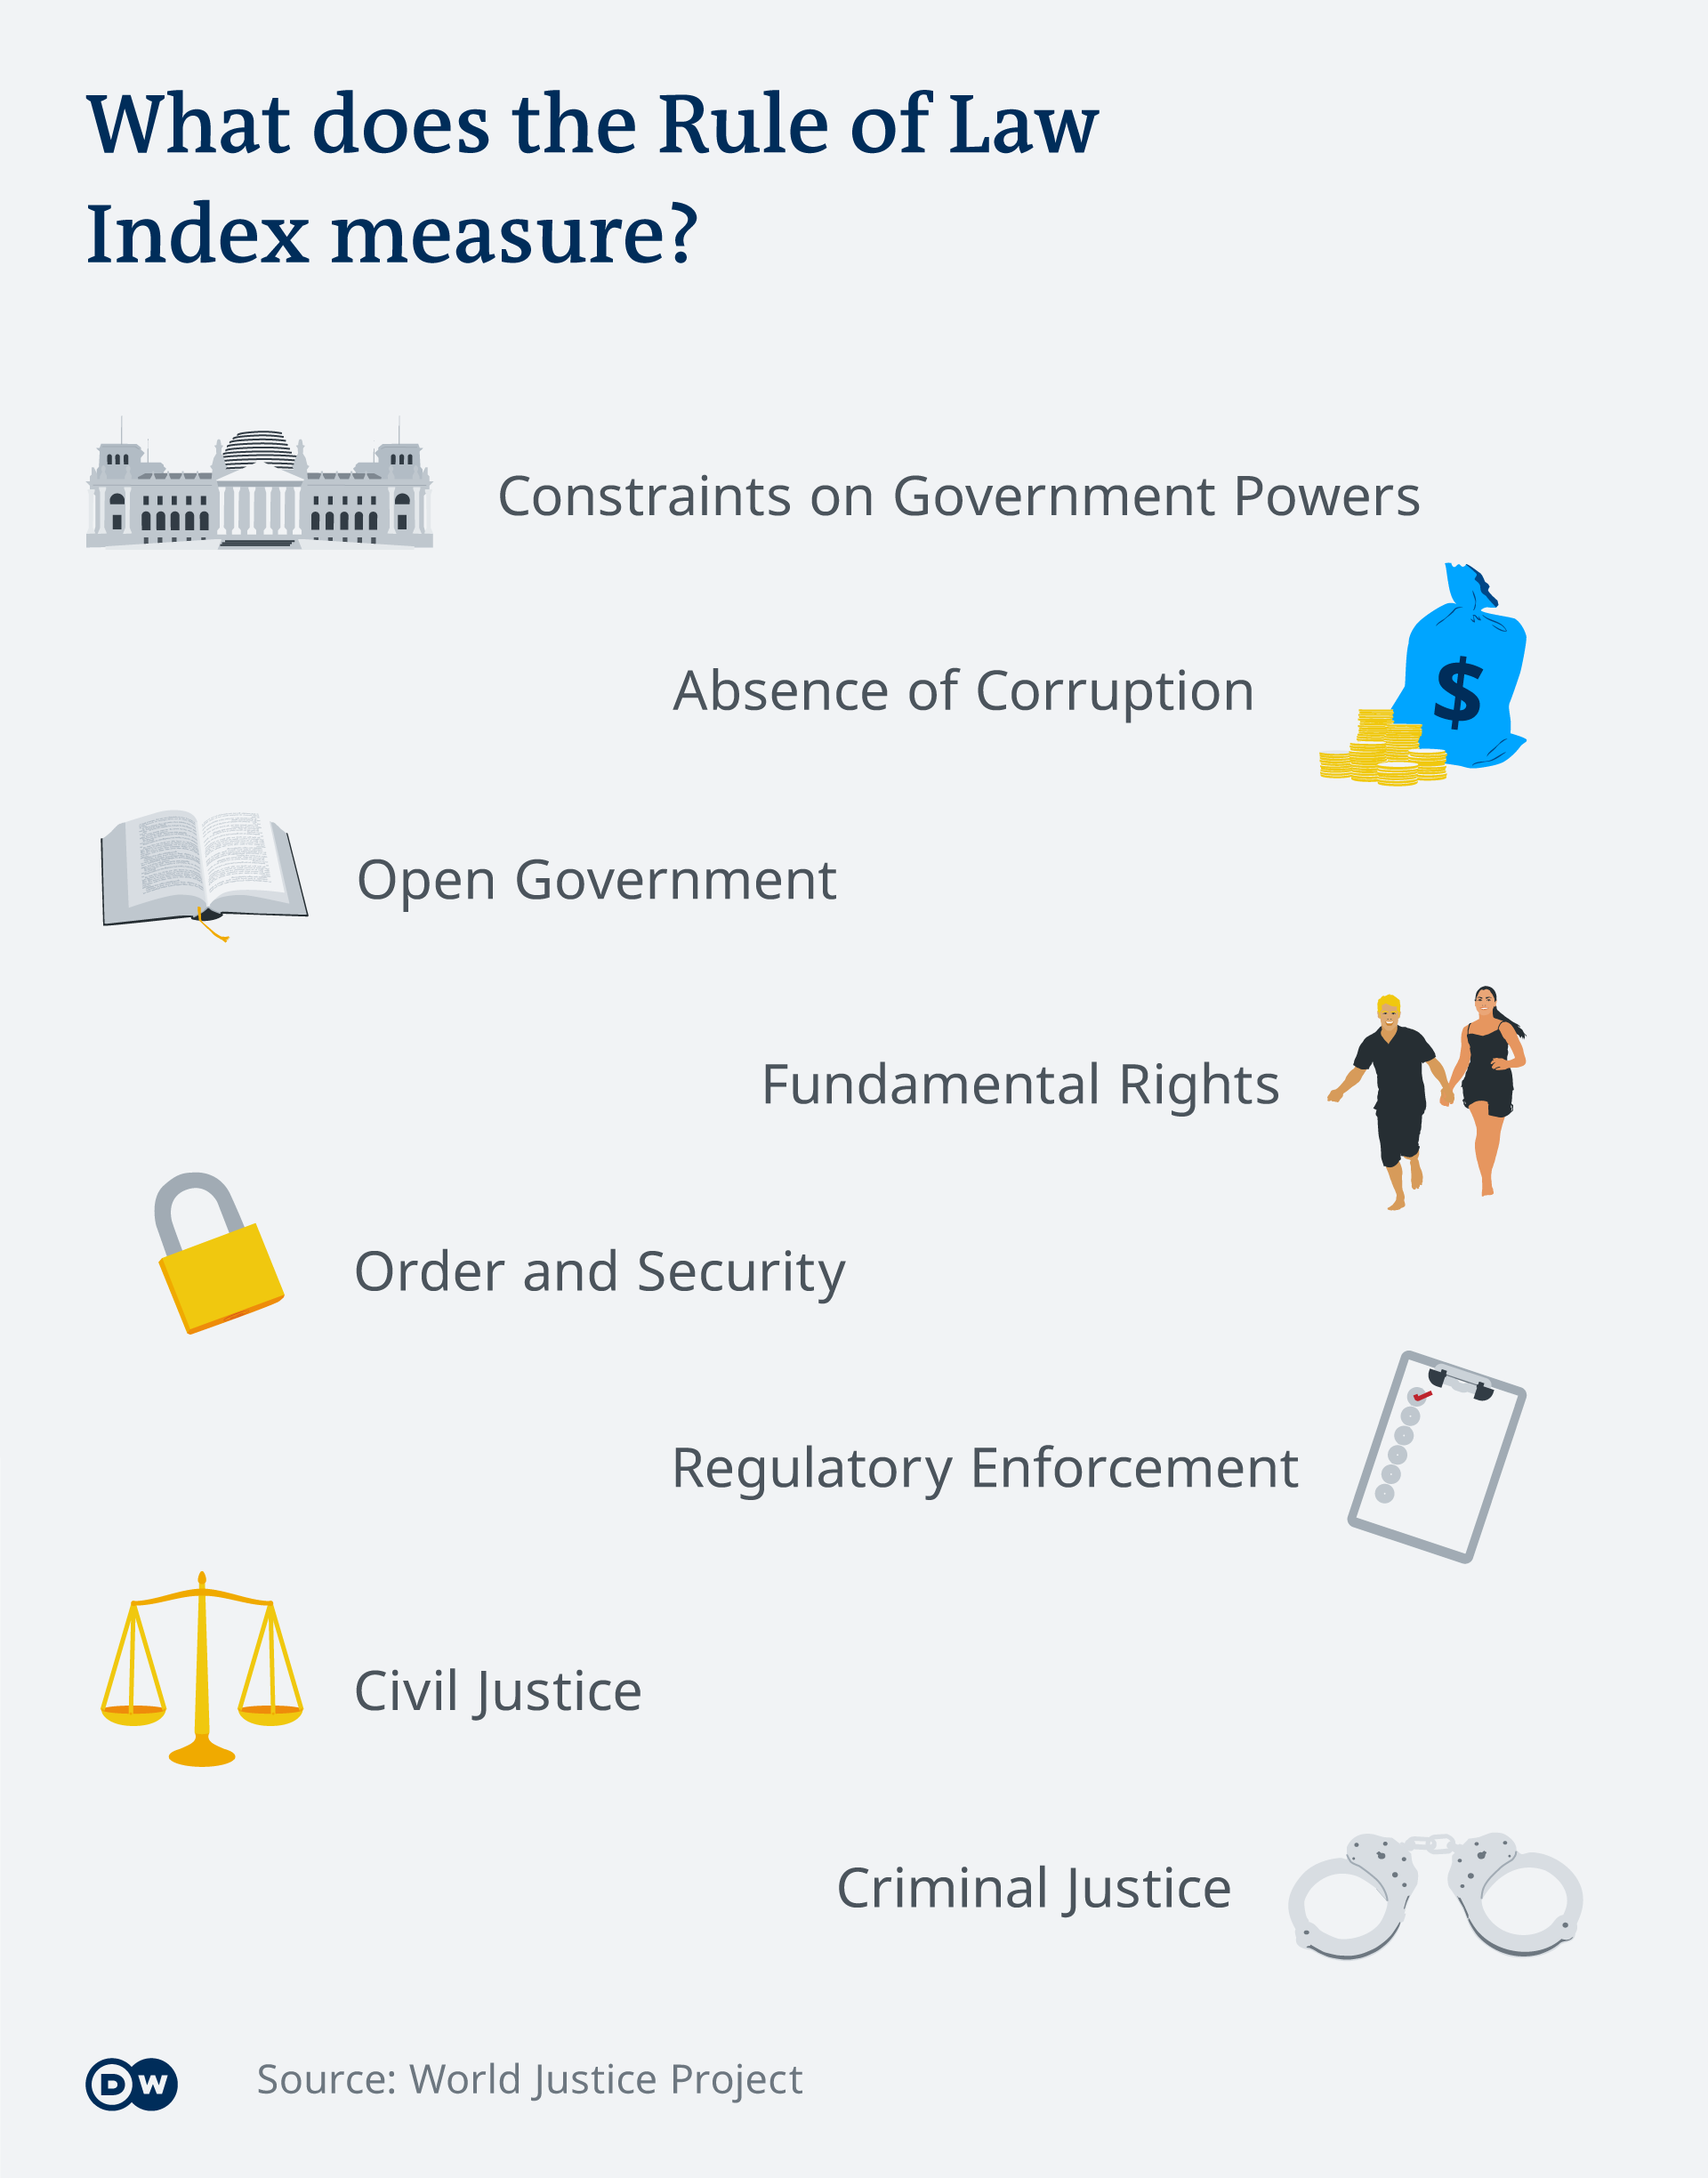 Image illustrating the eight categories measured for the Rule of Law Index